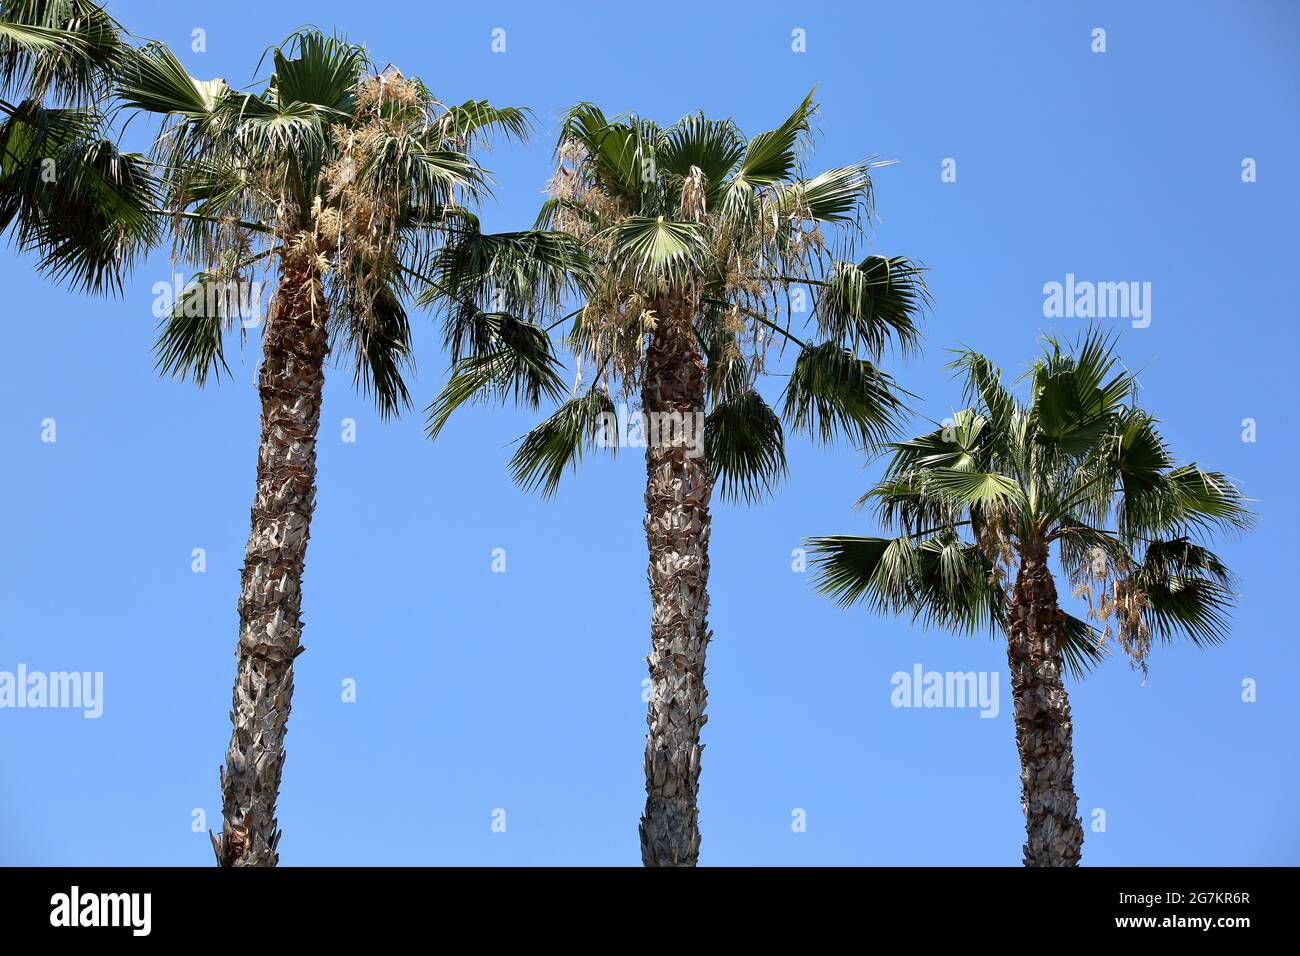 High palm trees against blue sky Stock Photo